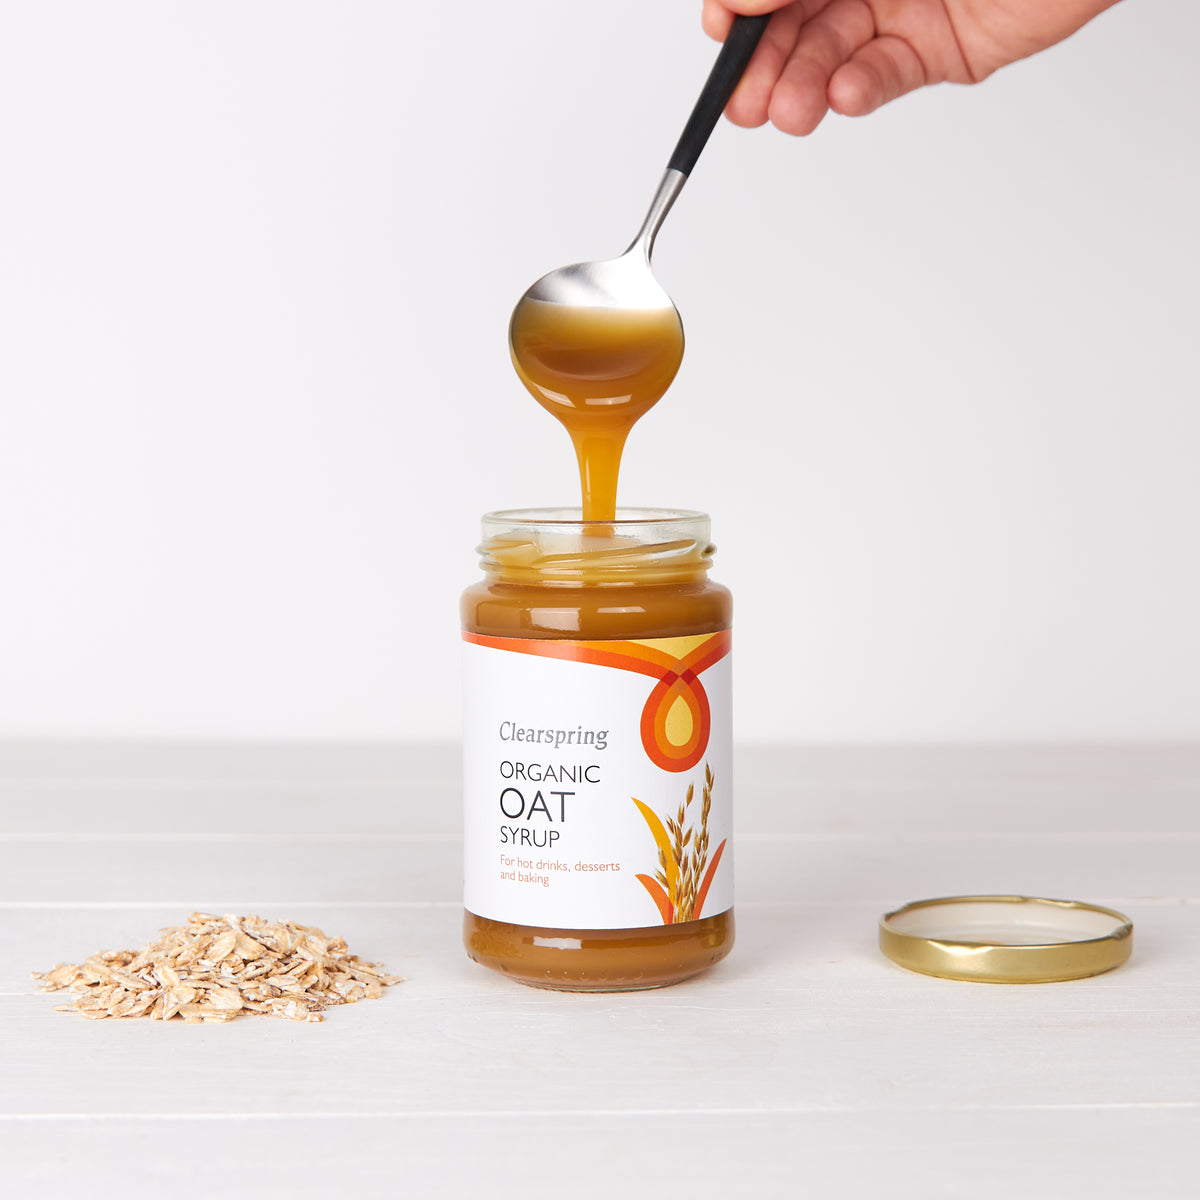 Clearspring Organic Oat Syrup